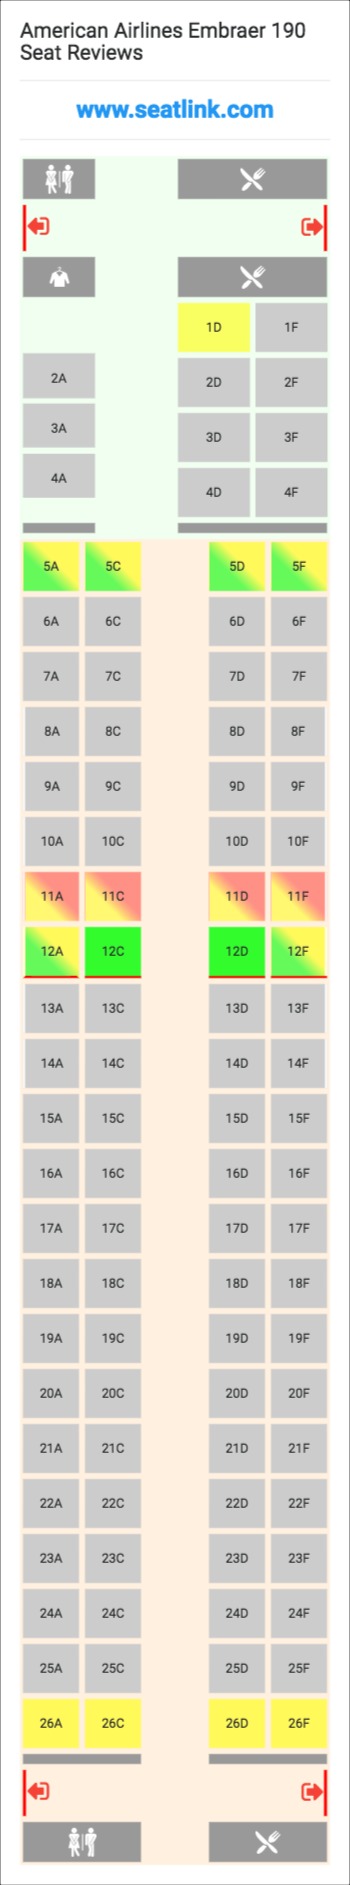 American Airlines Embraer 190 Seating Chart Updated July 2020 Seatlink